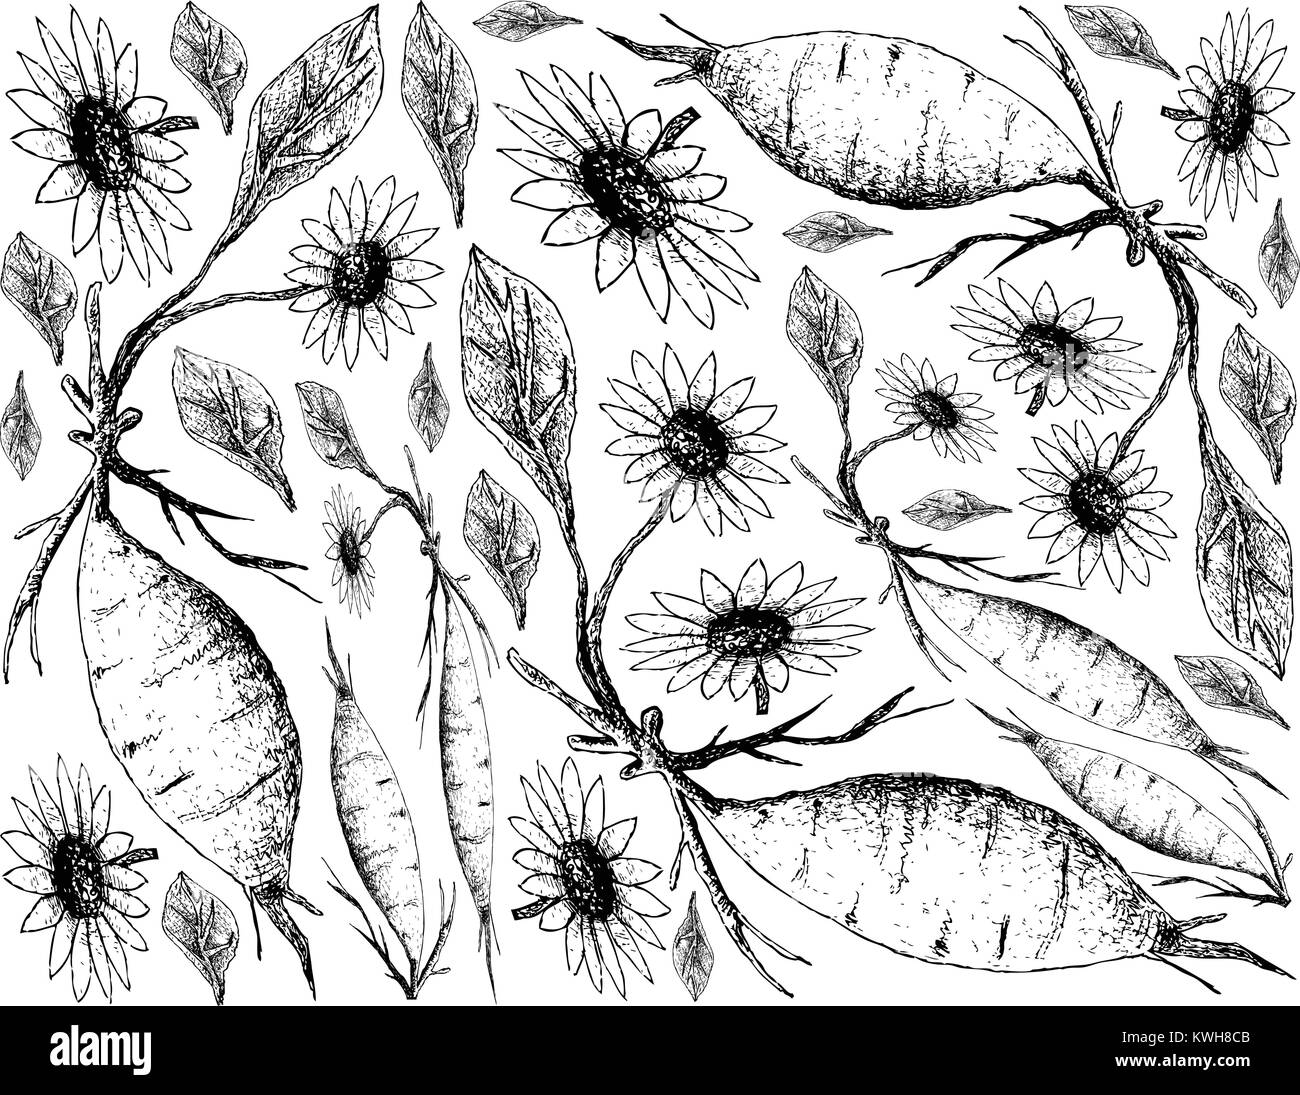 Root and Tuberous Vegetables, Illustration Hand Drawn Sketch of Fresh Yacon or Smallanthus Sonchifolius Plant Isolated on White Background. Stock Vector